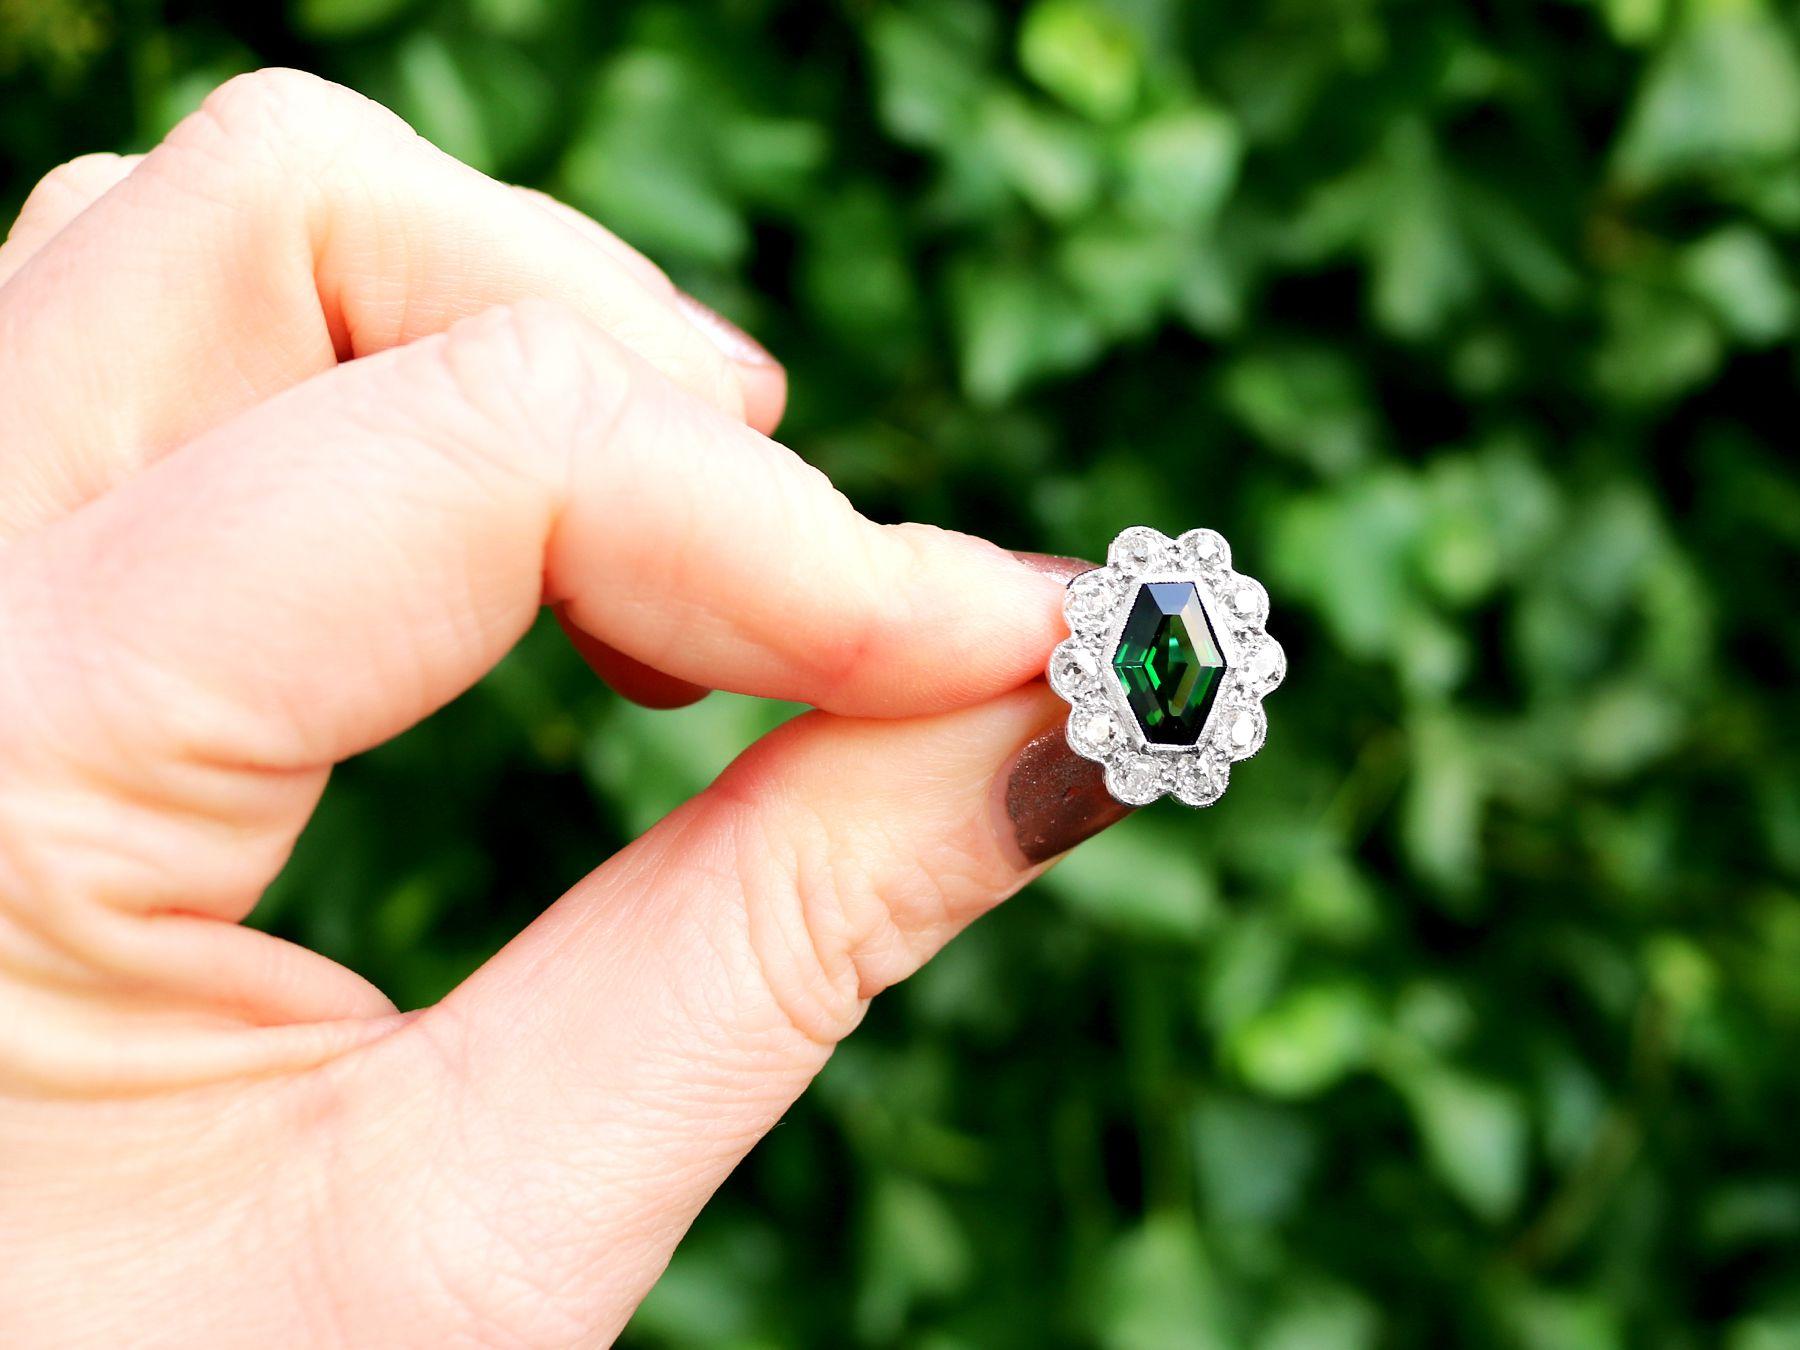 A stunning, fine and impressive 1.45 carat green tourmaline and 1.96 carat diamond, 18 karat white gold cocktail ring; part of our diverse antique jewelry and collections.

This stunning, fine and impressive antique gemstone ring has been crafted in